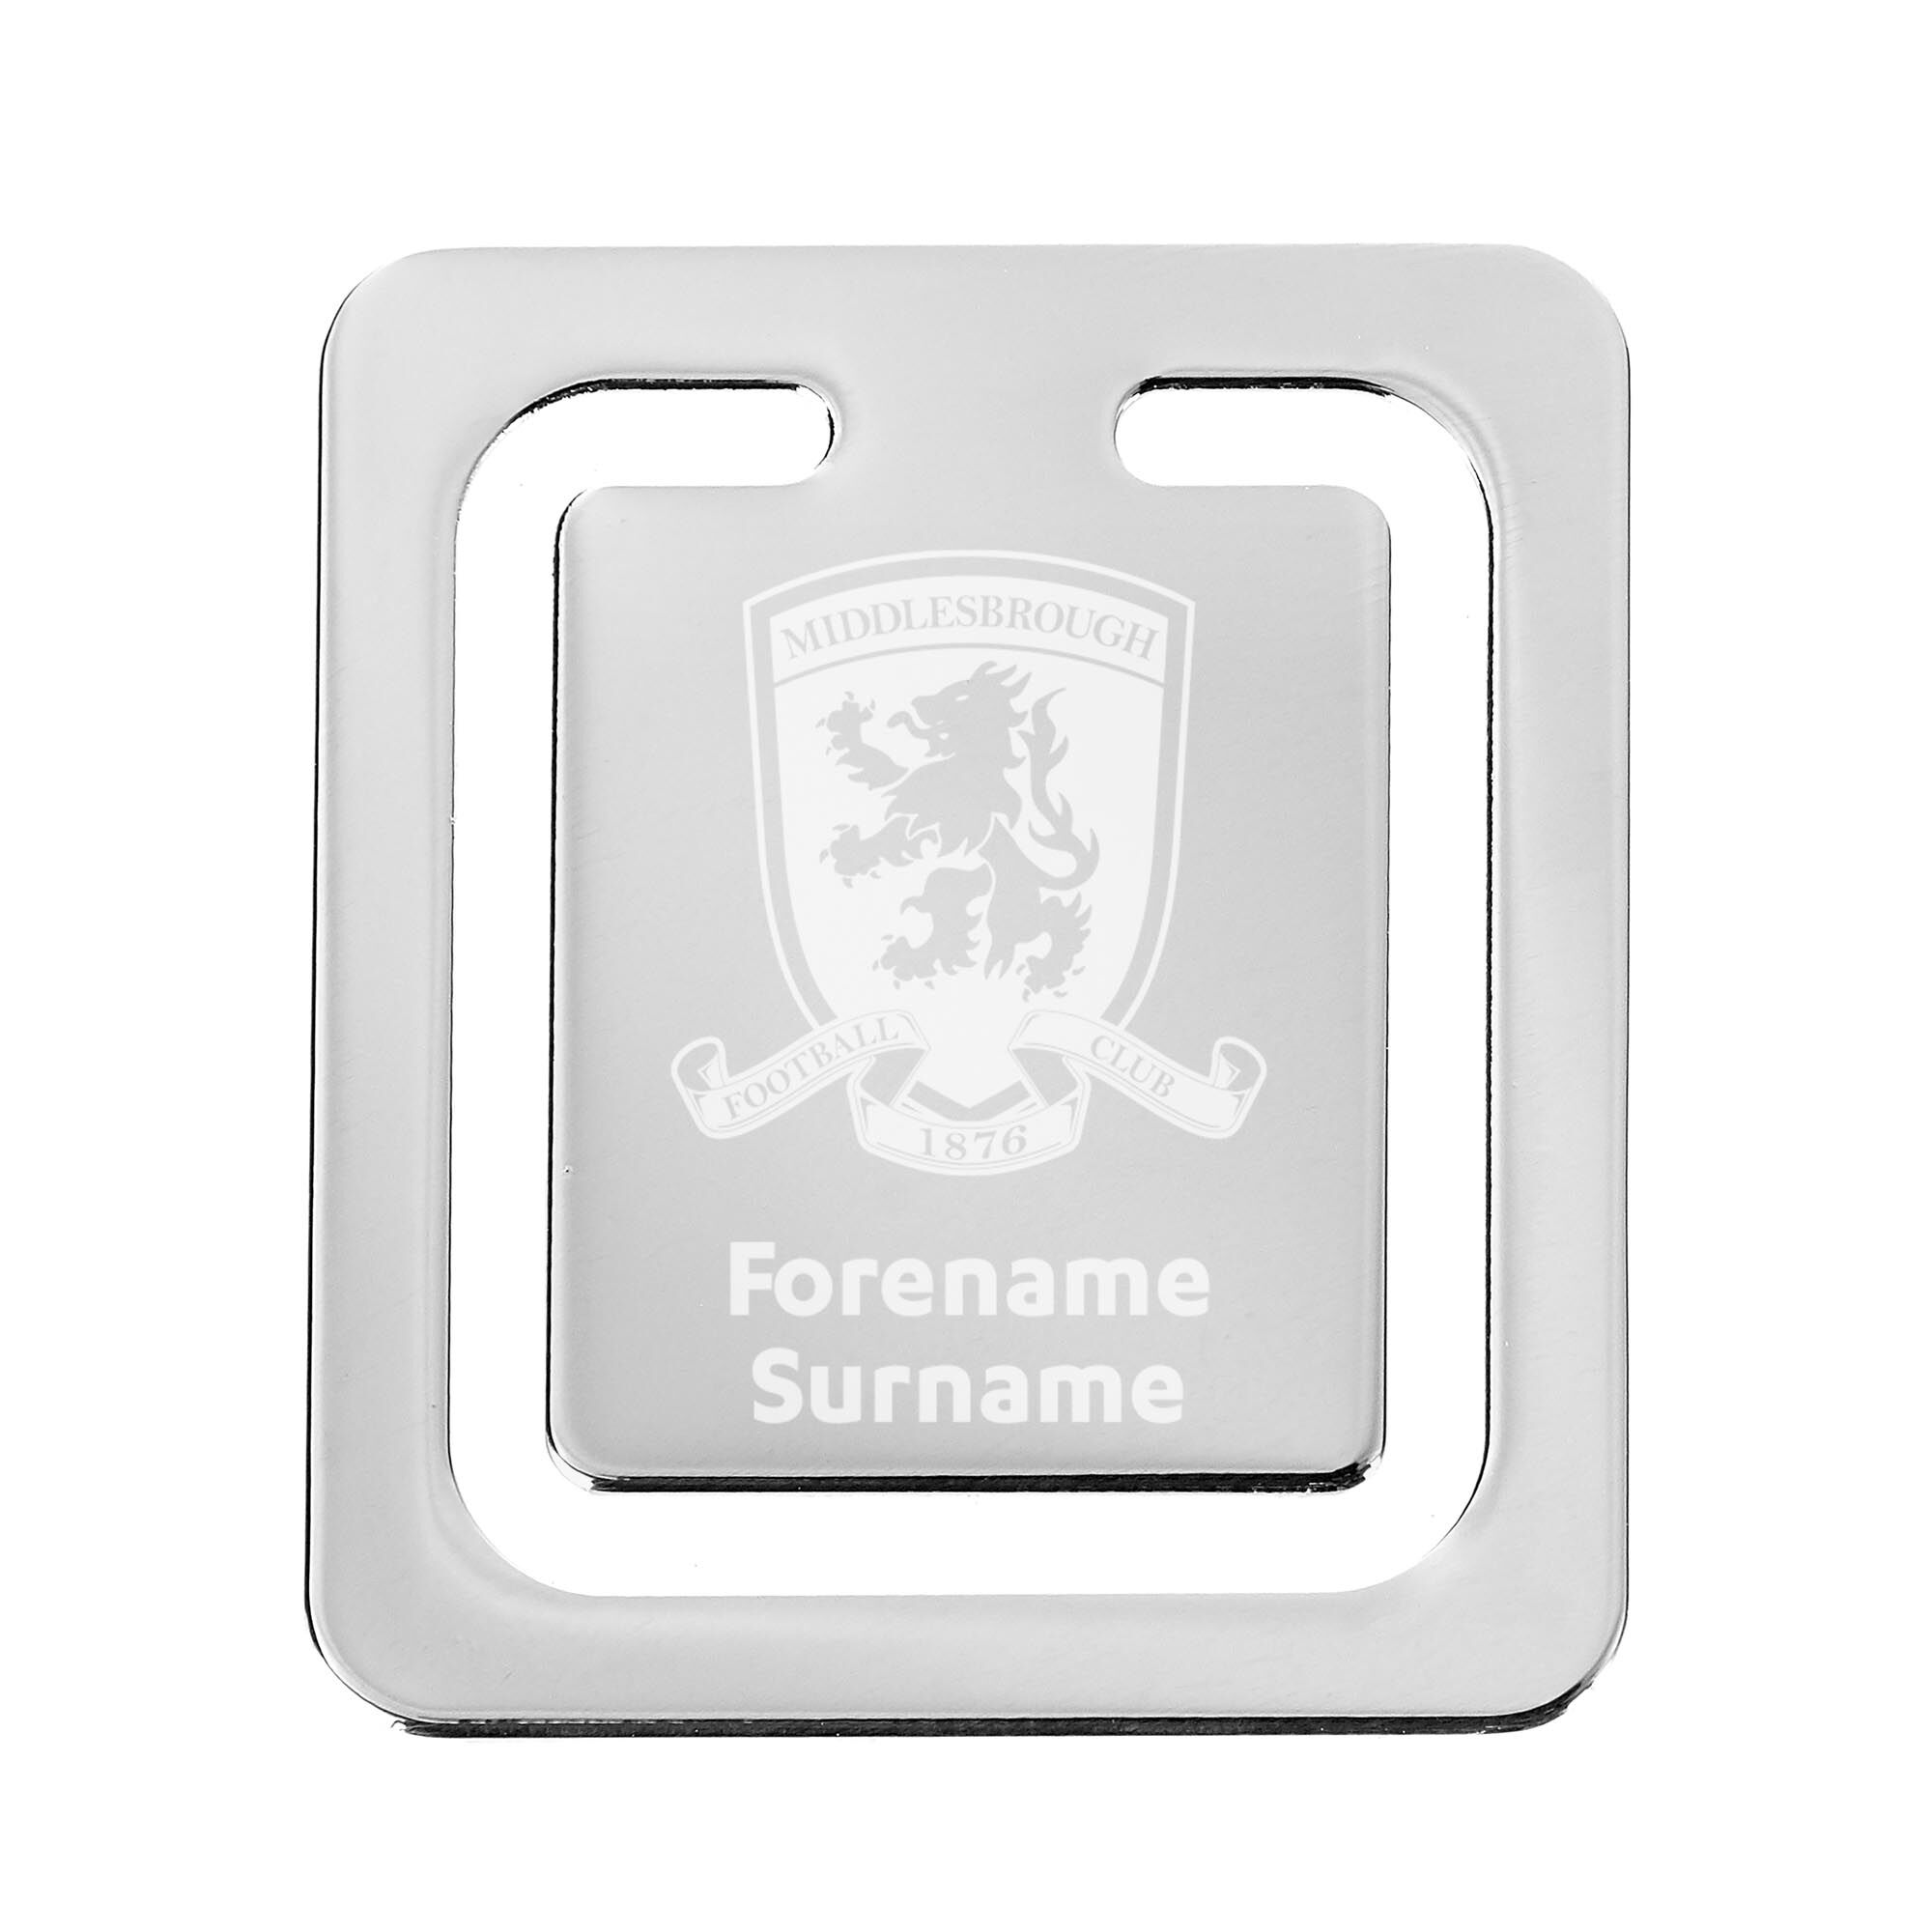 Personalised Middlesbrough FC Crest Bookmark